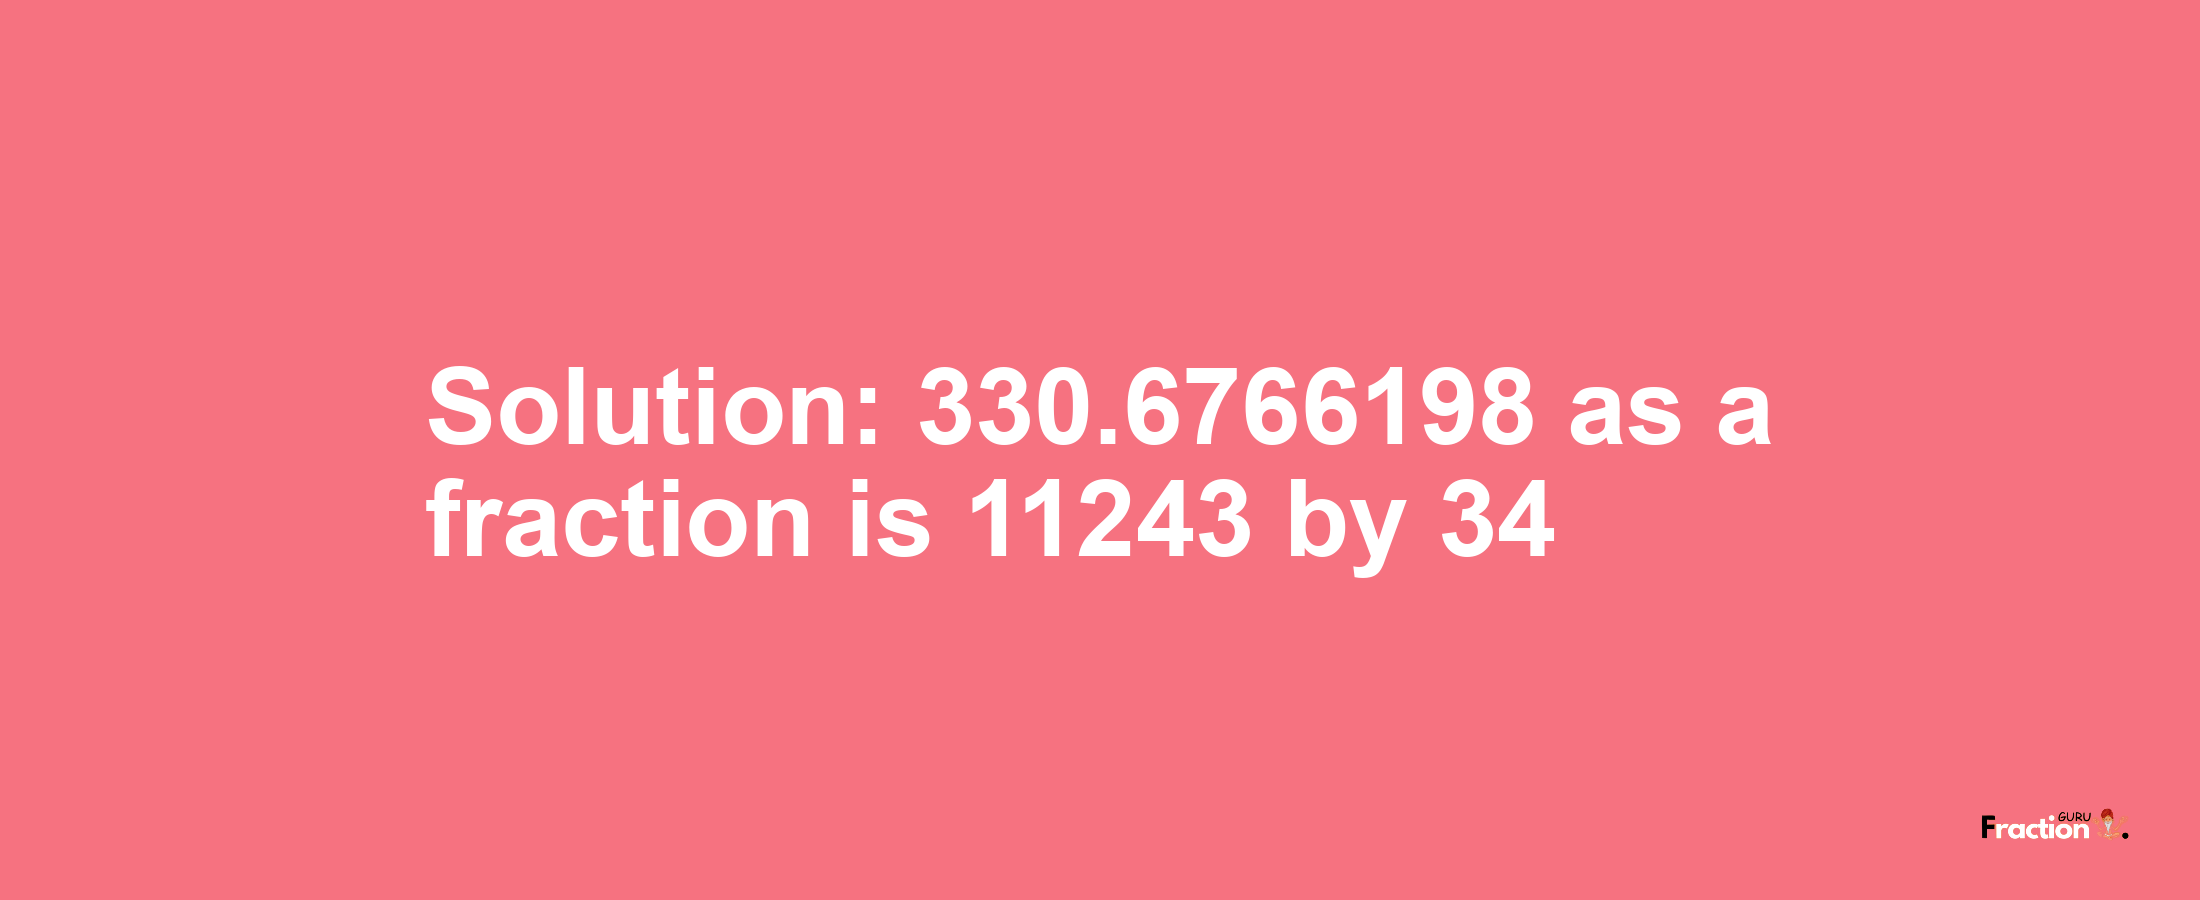 Solution:330.6766198 as a fraction is 11243/34